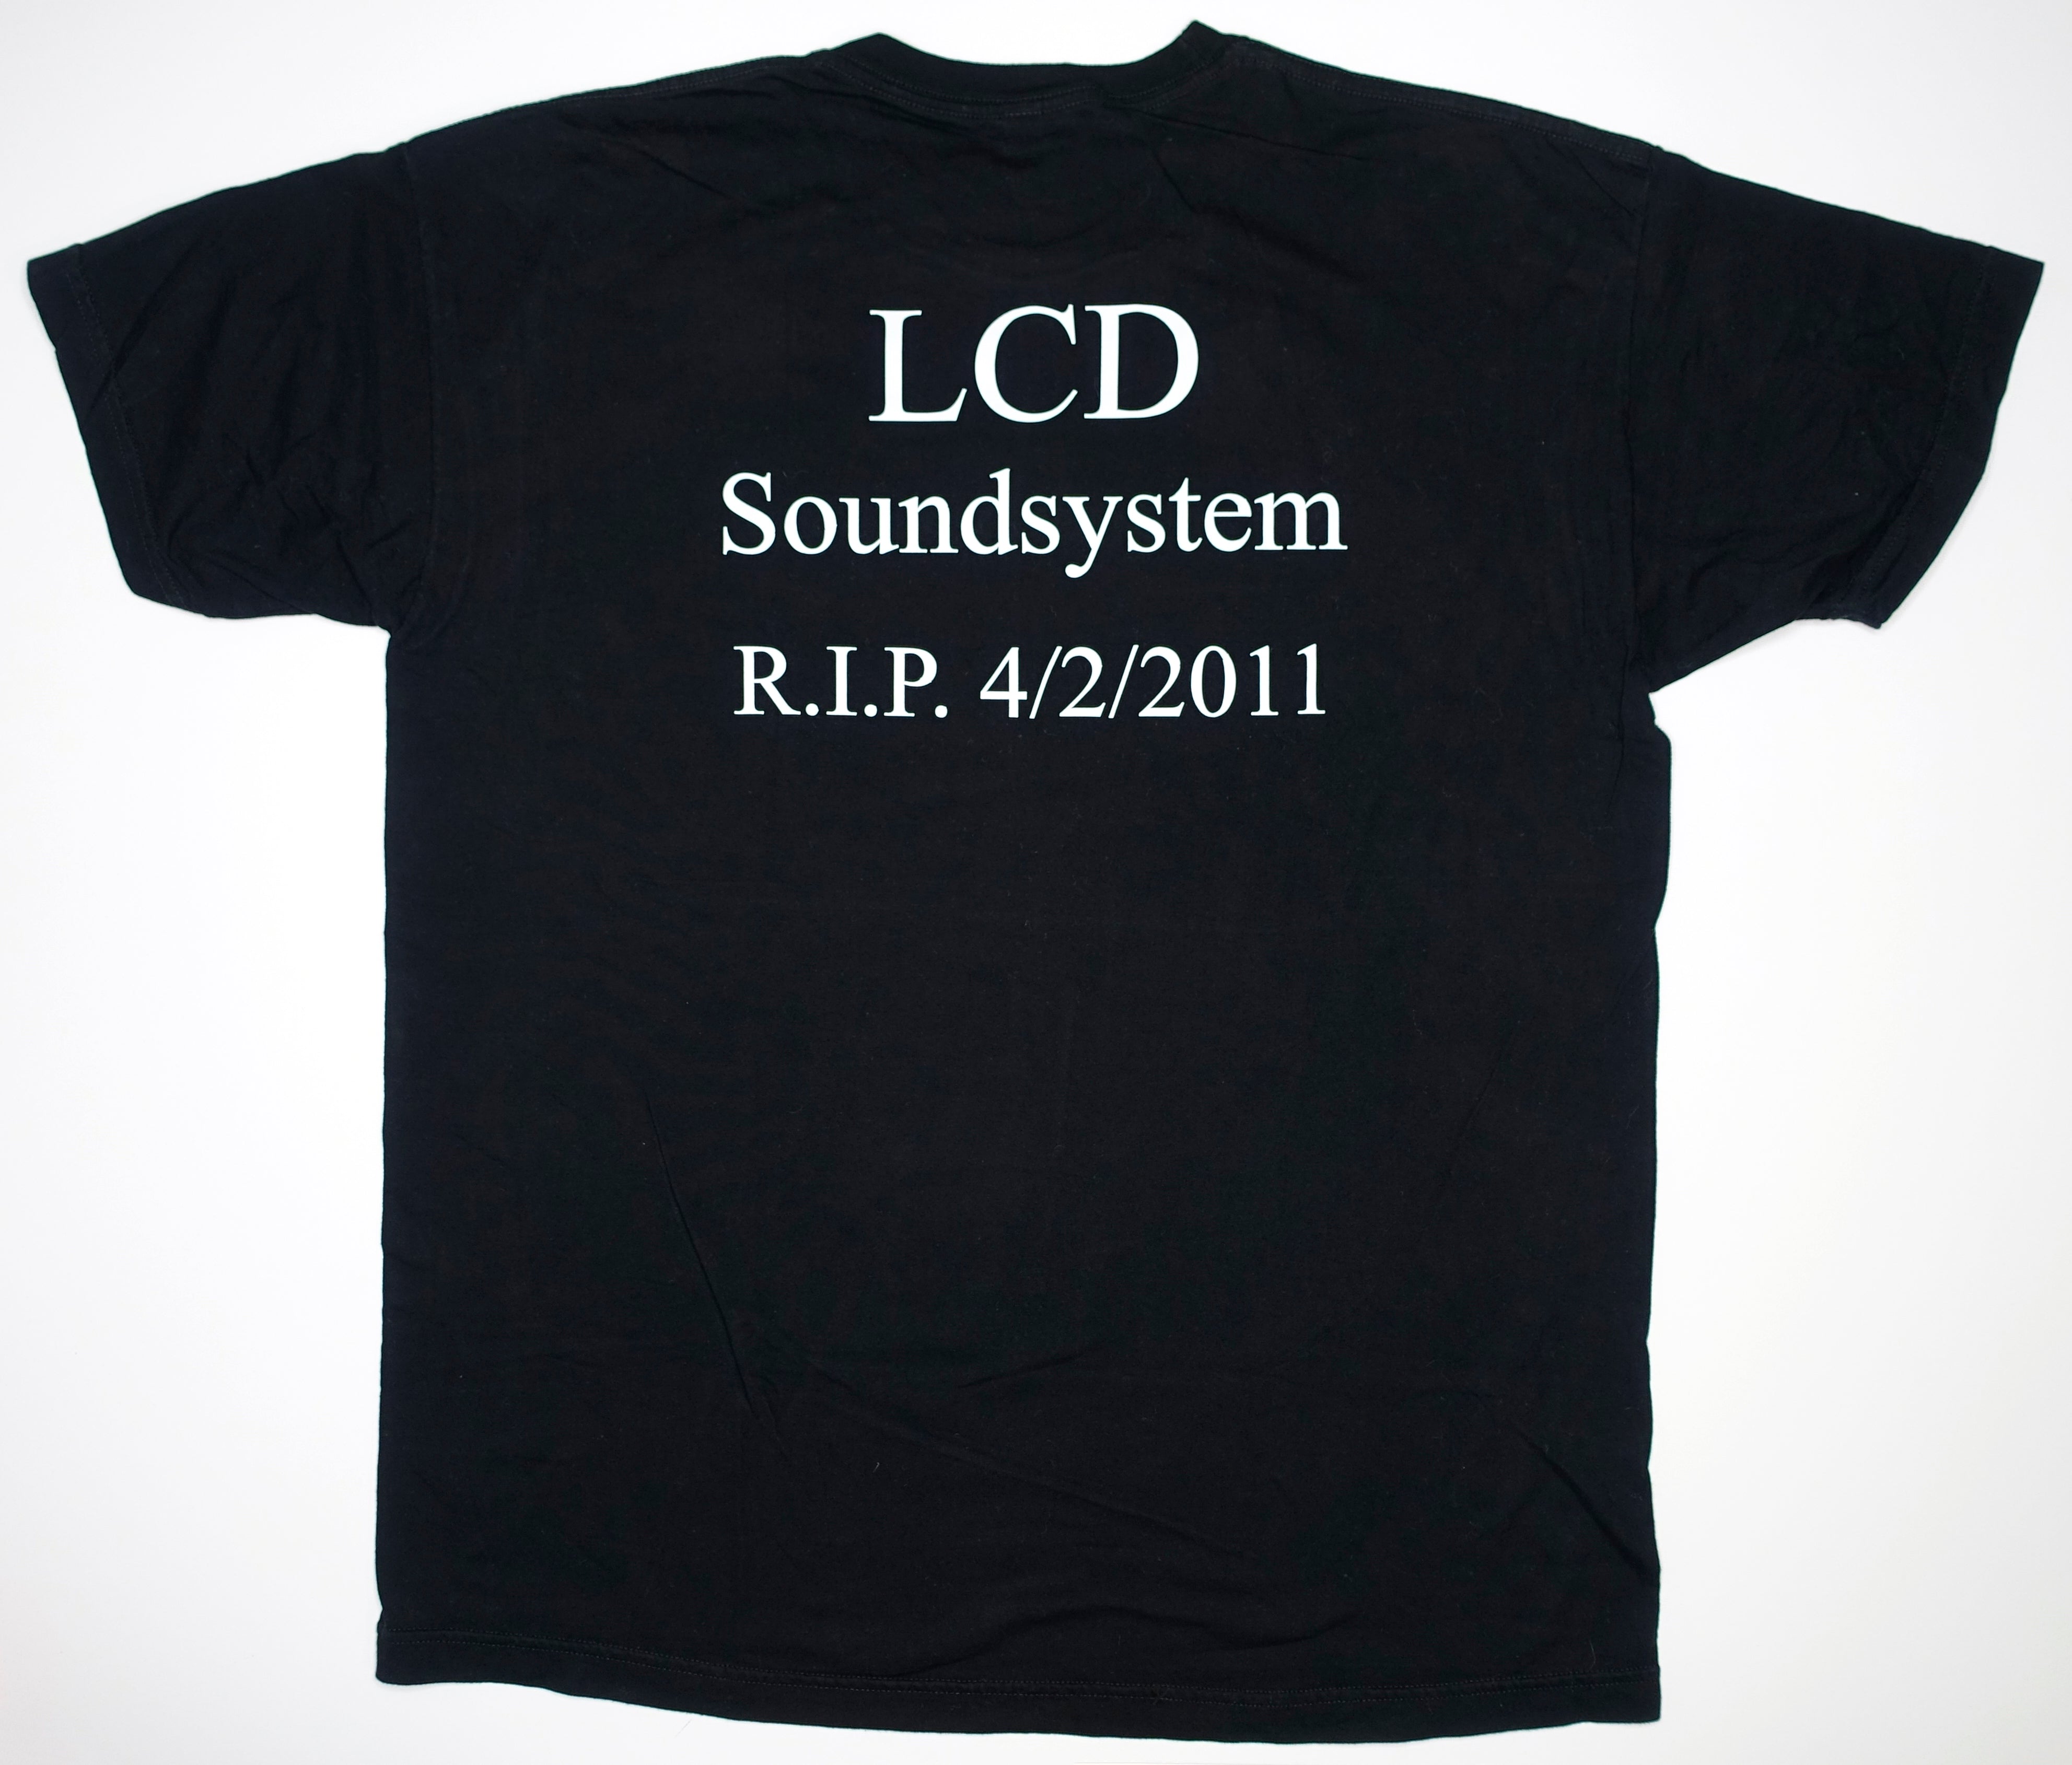 LCD Soundsystem - Last Show at MSG 2011 Tour Shirt Size Large